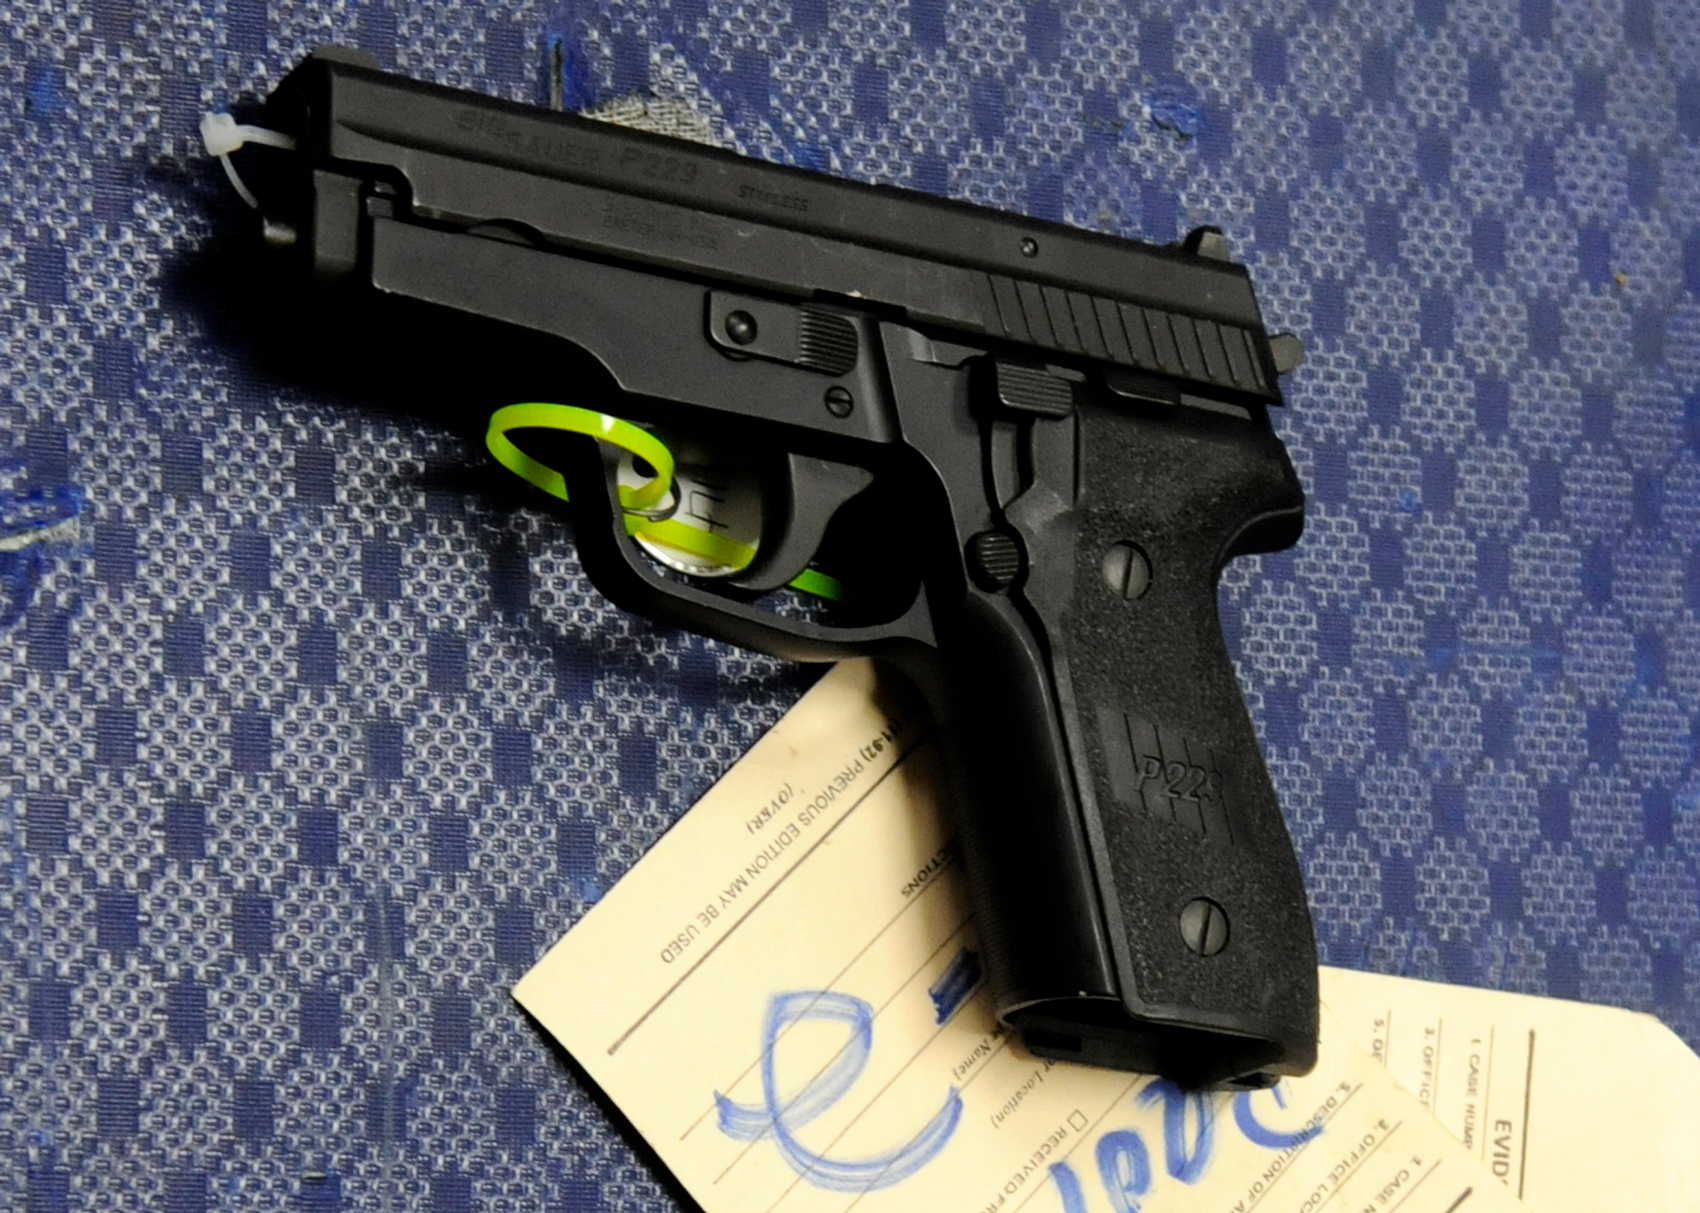 A Sig Sauer 9mm pistol, a popular gun used by Mexican drug cartels, is displayed at a Bureau of Alcohol, Tobacco, Firearms and Explosives' news conference Tuesday, April 28, 2009 in Houston.